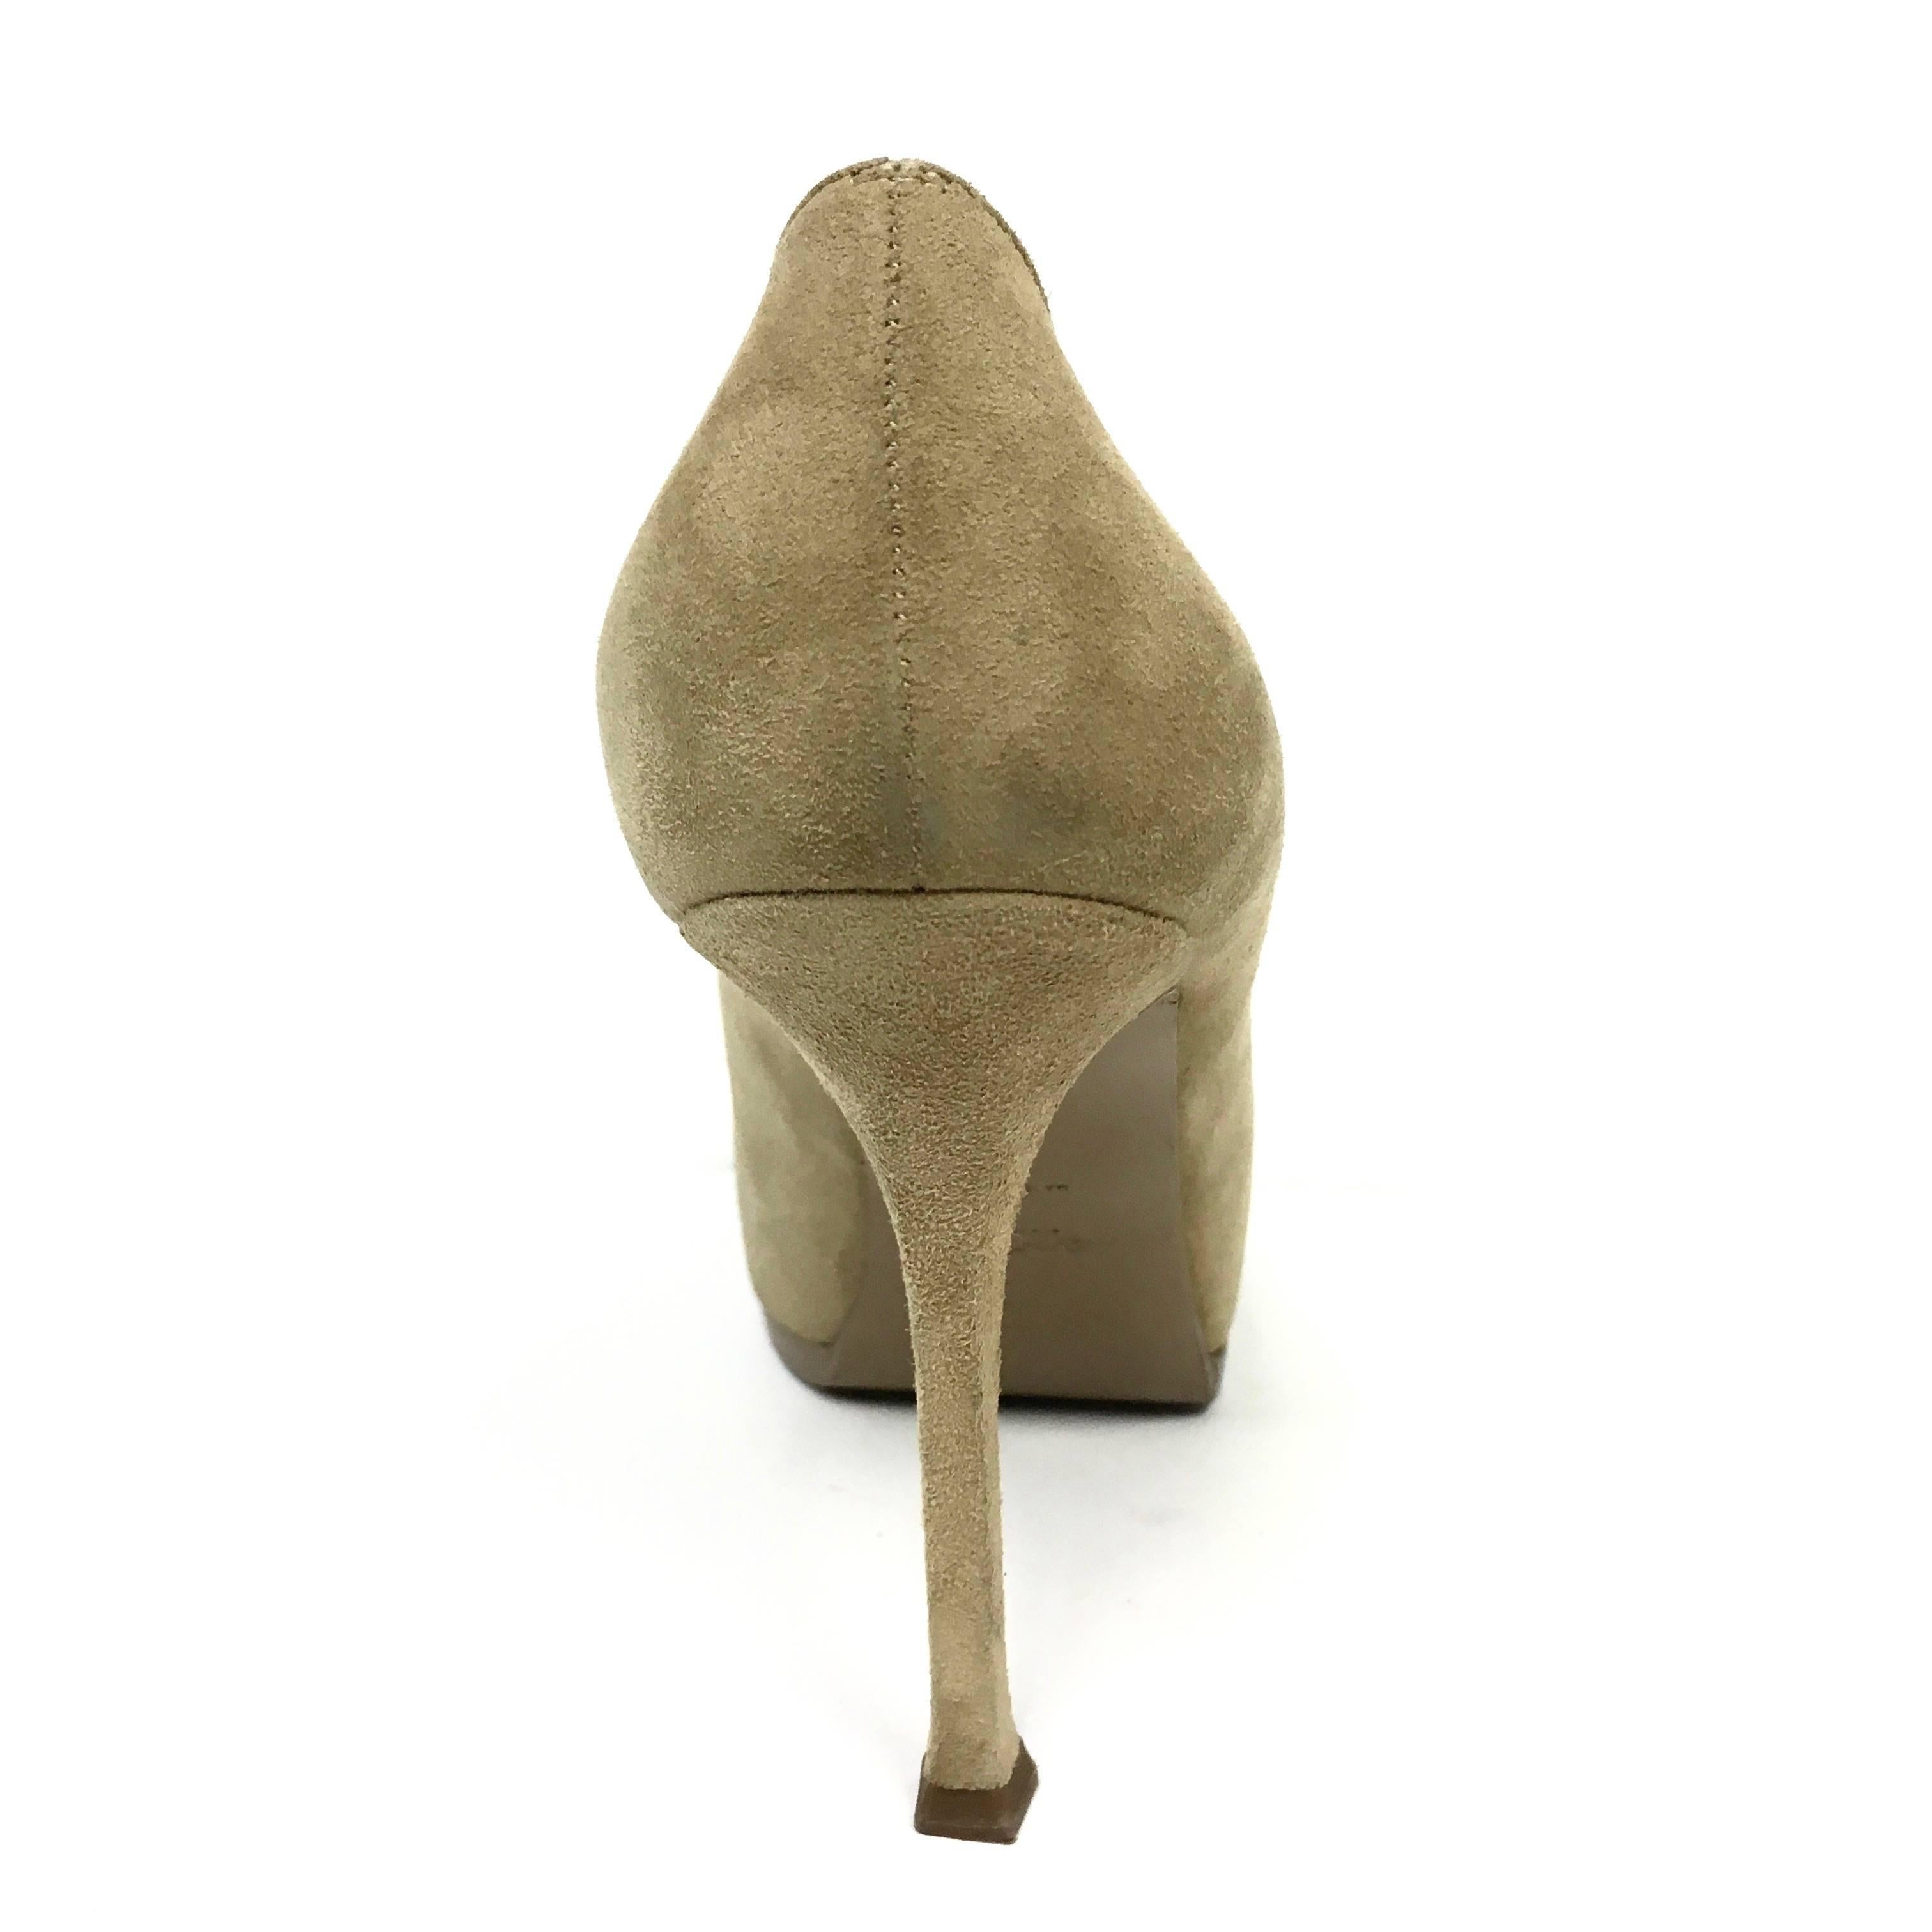 Beautifully crafted in luxe materials - a shoe you will reach for regardless of season and trend. Neutral and seasonless in a sumptuous suede outer,
leather lining and smooth leather-out sole, internal platform, and beautifully crafted stiletto